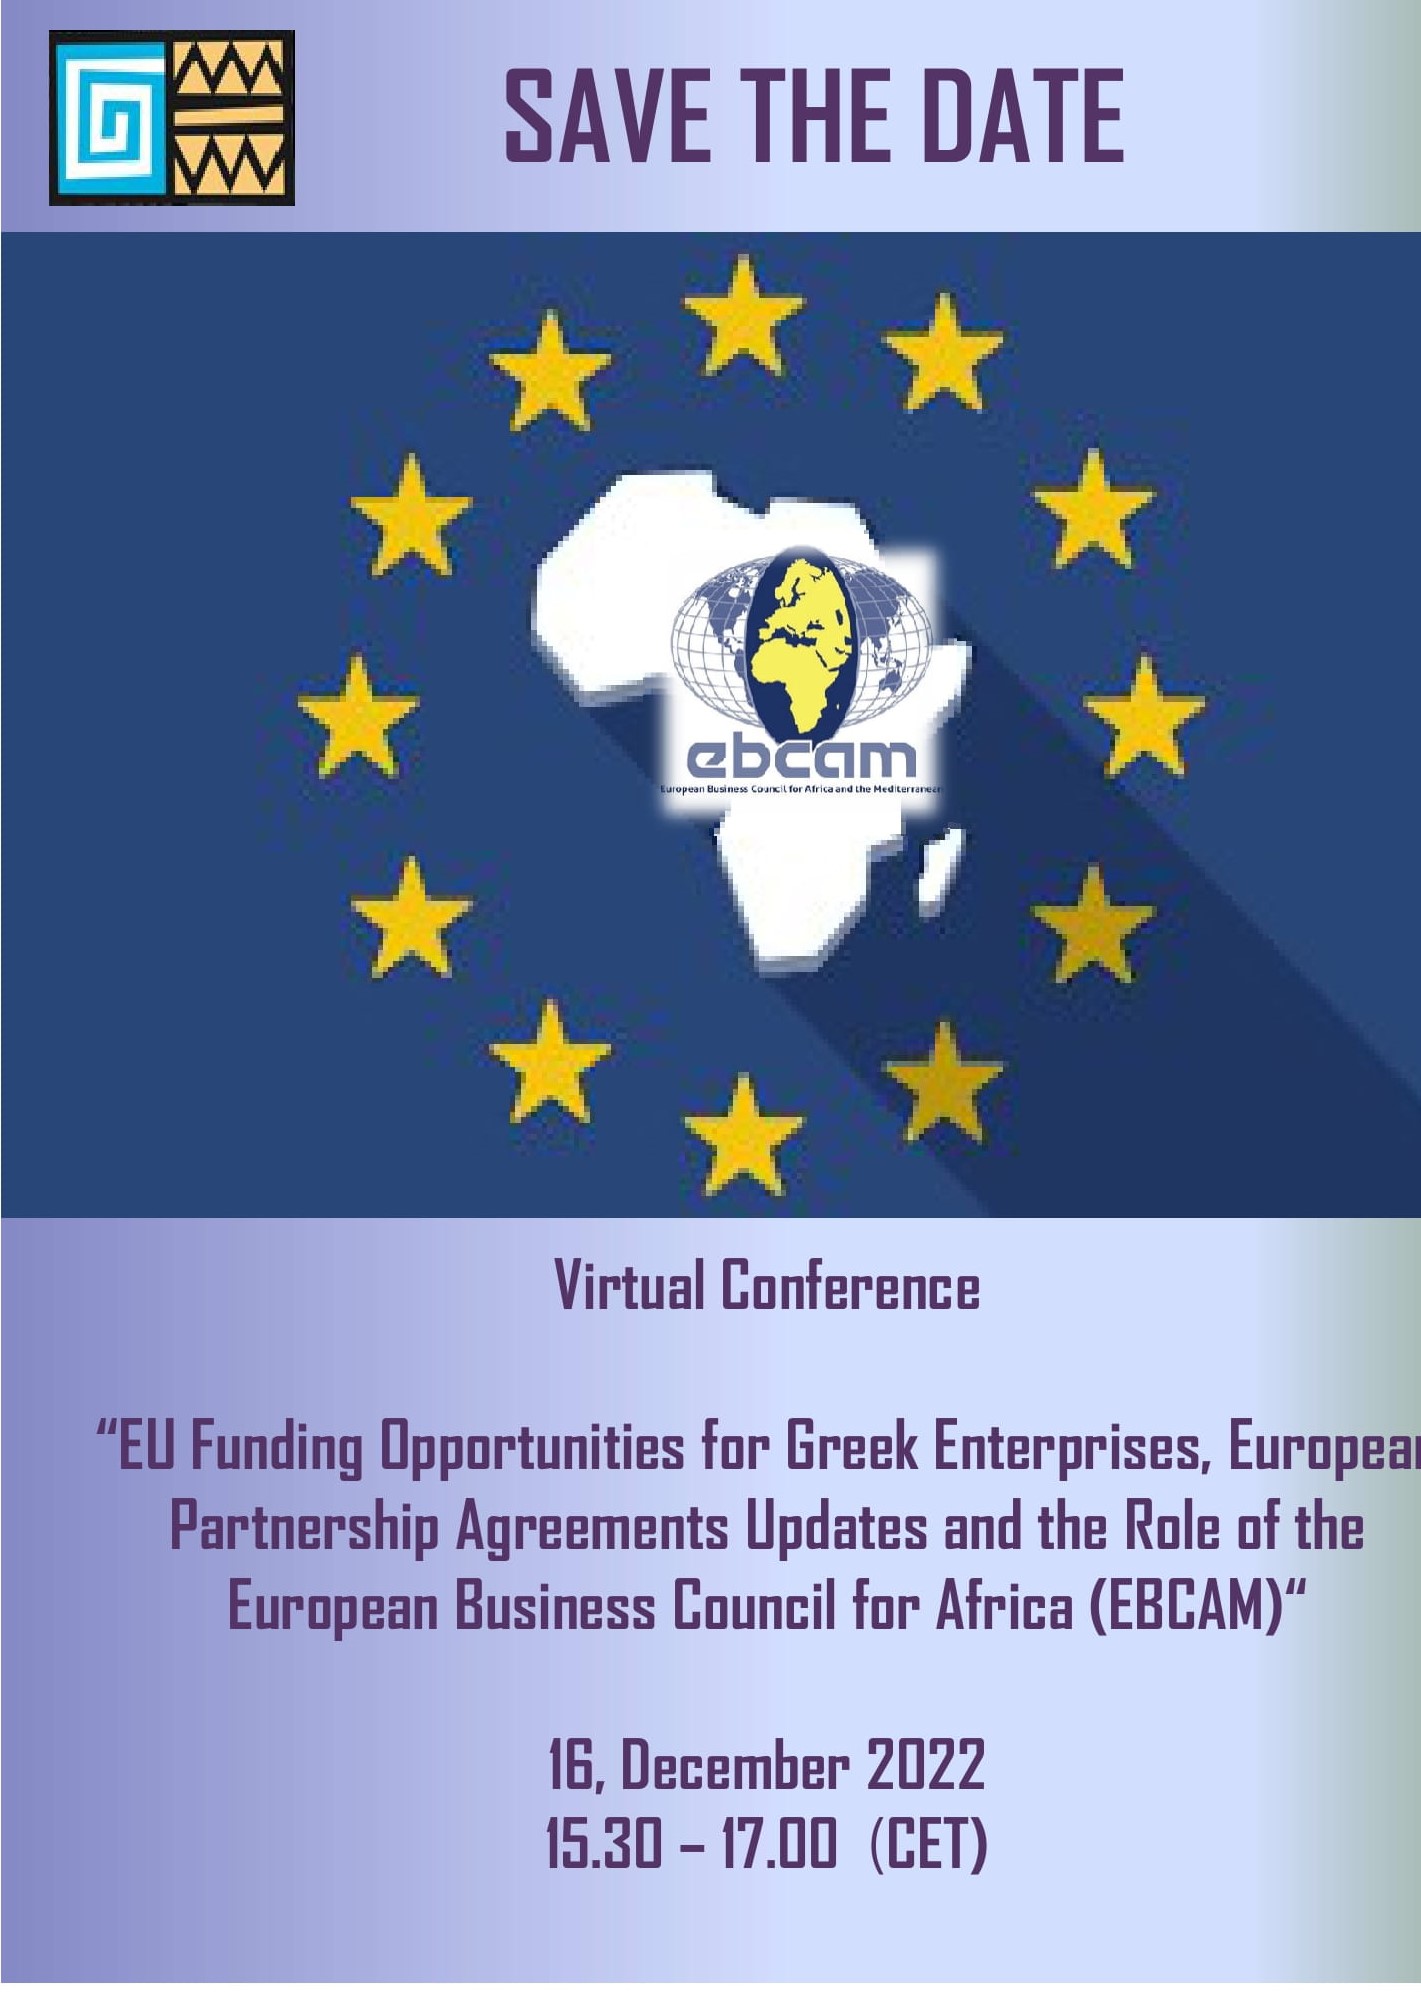 Invitation: Teleconference “EU Funding for Africa, Opportunities for Greek Enterprises and  the Role of the European Business Council for Africa (EBCAM)”